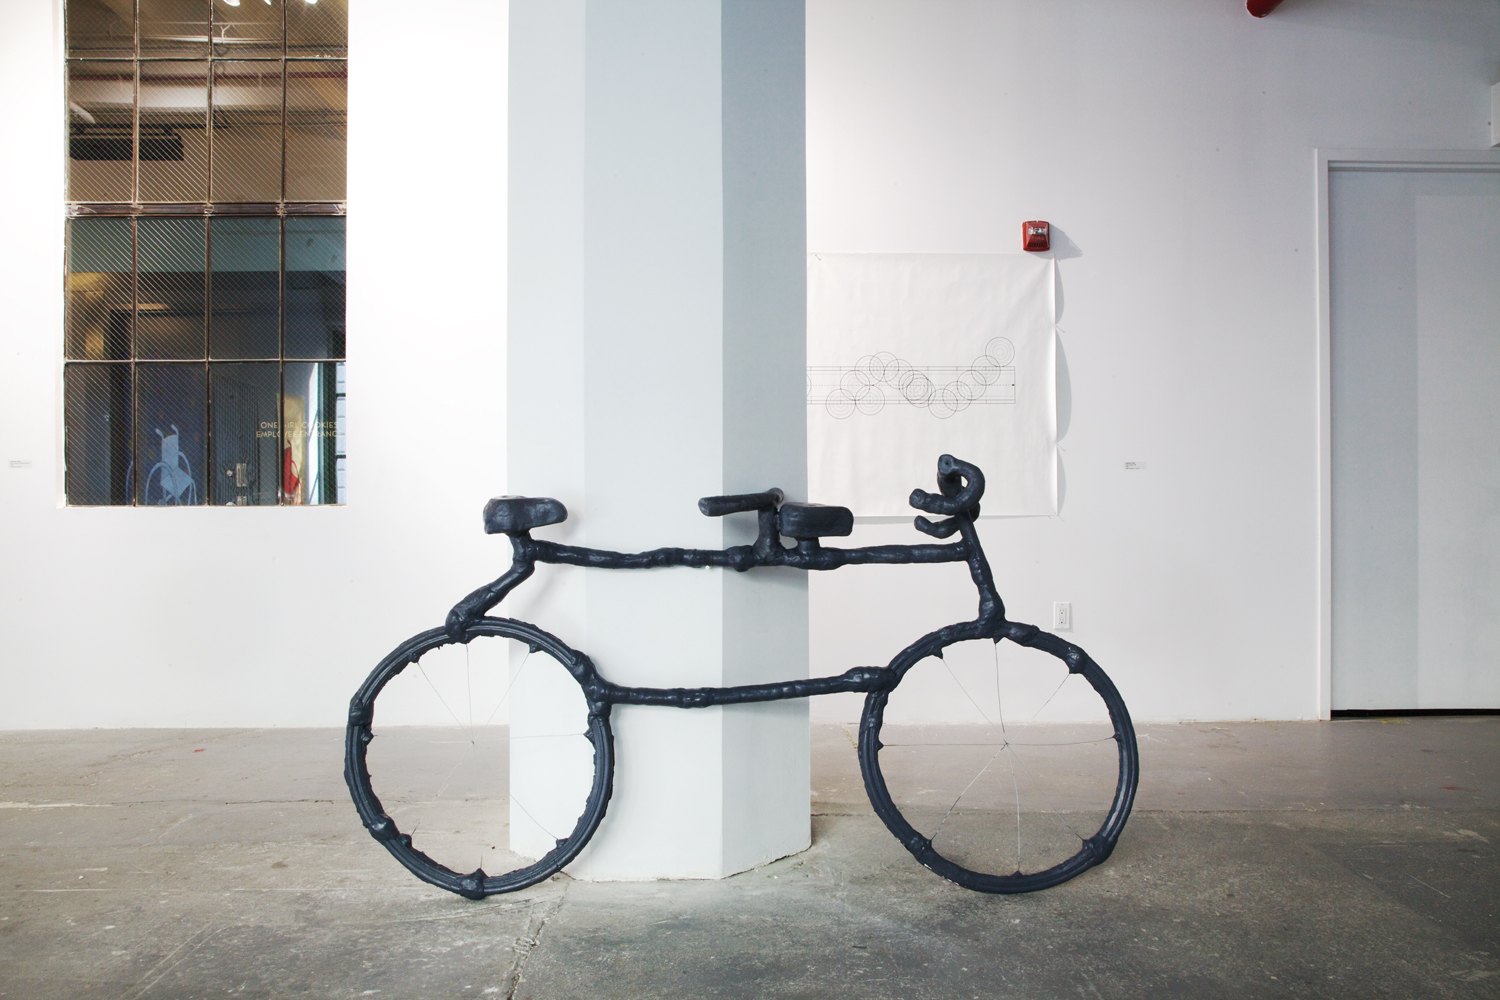 Installation image containing a sculpture of a bike